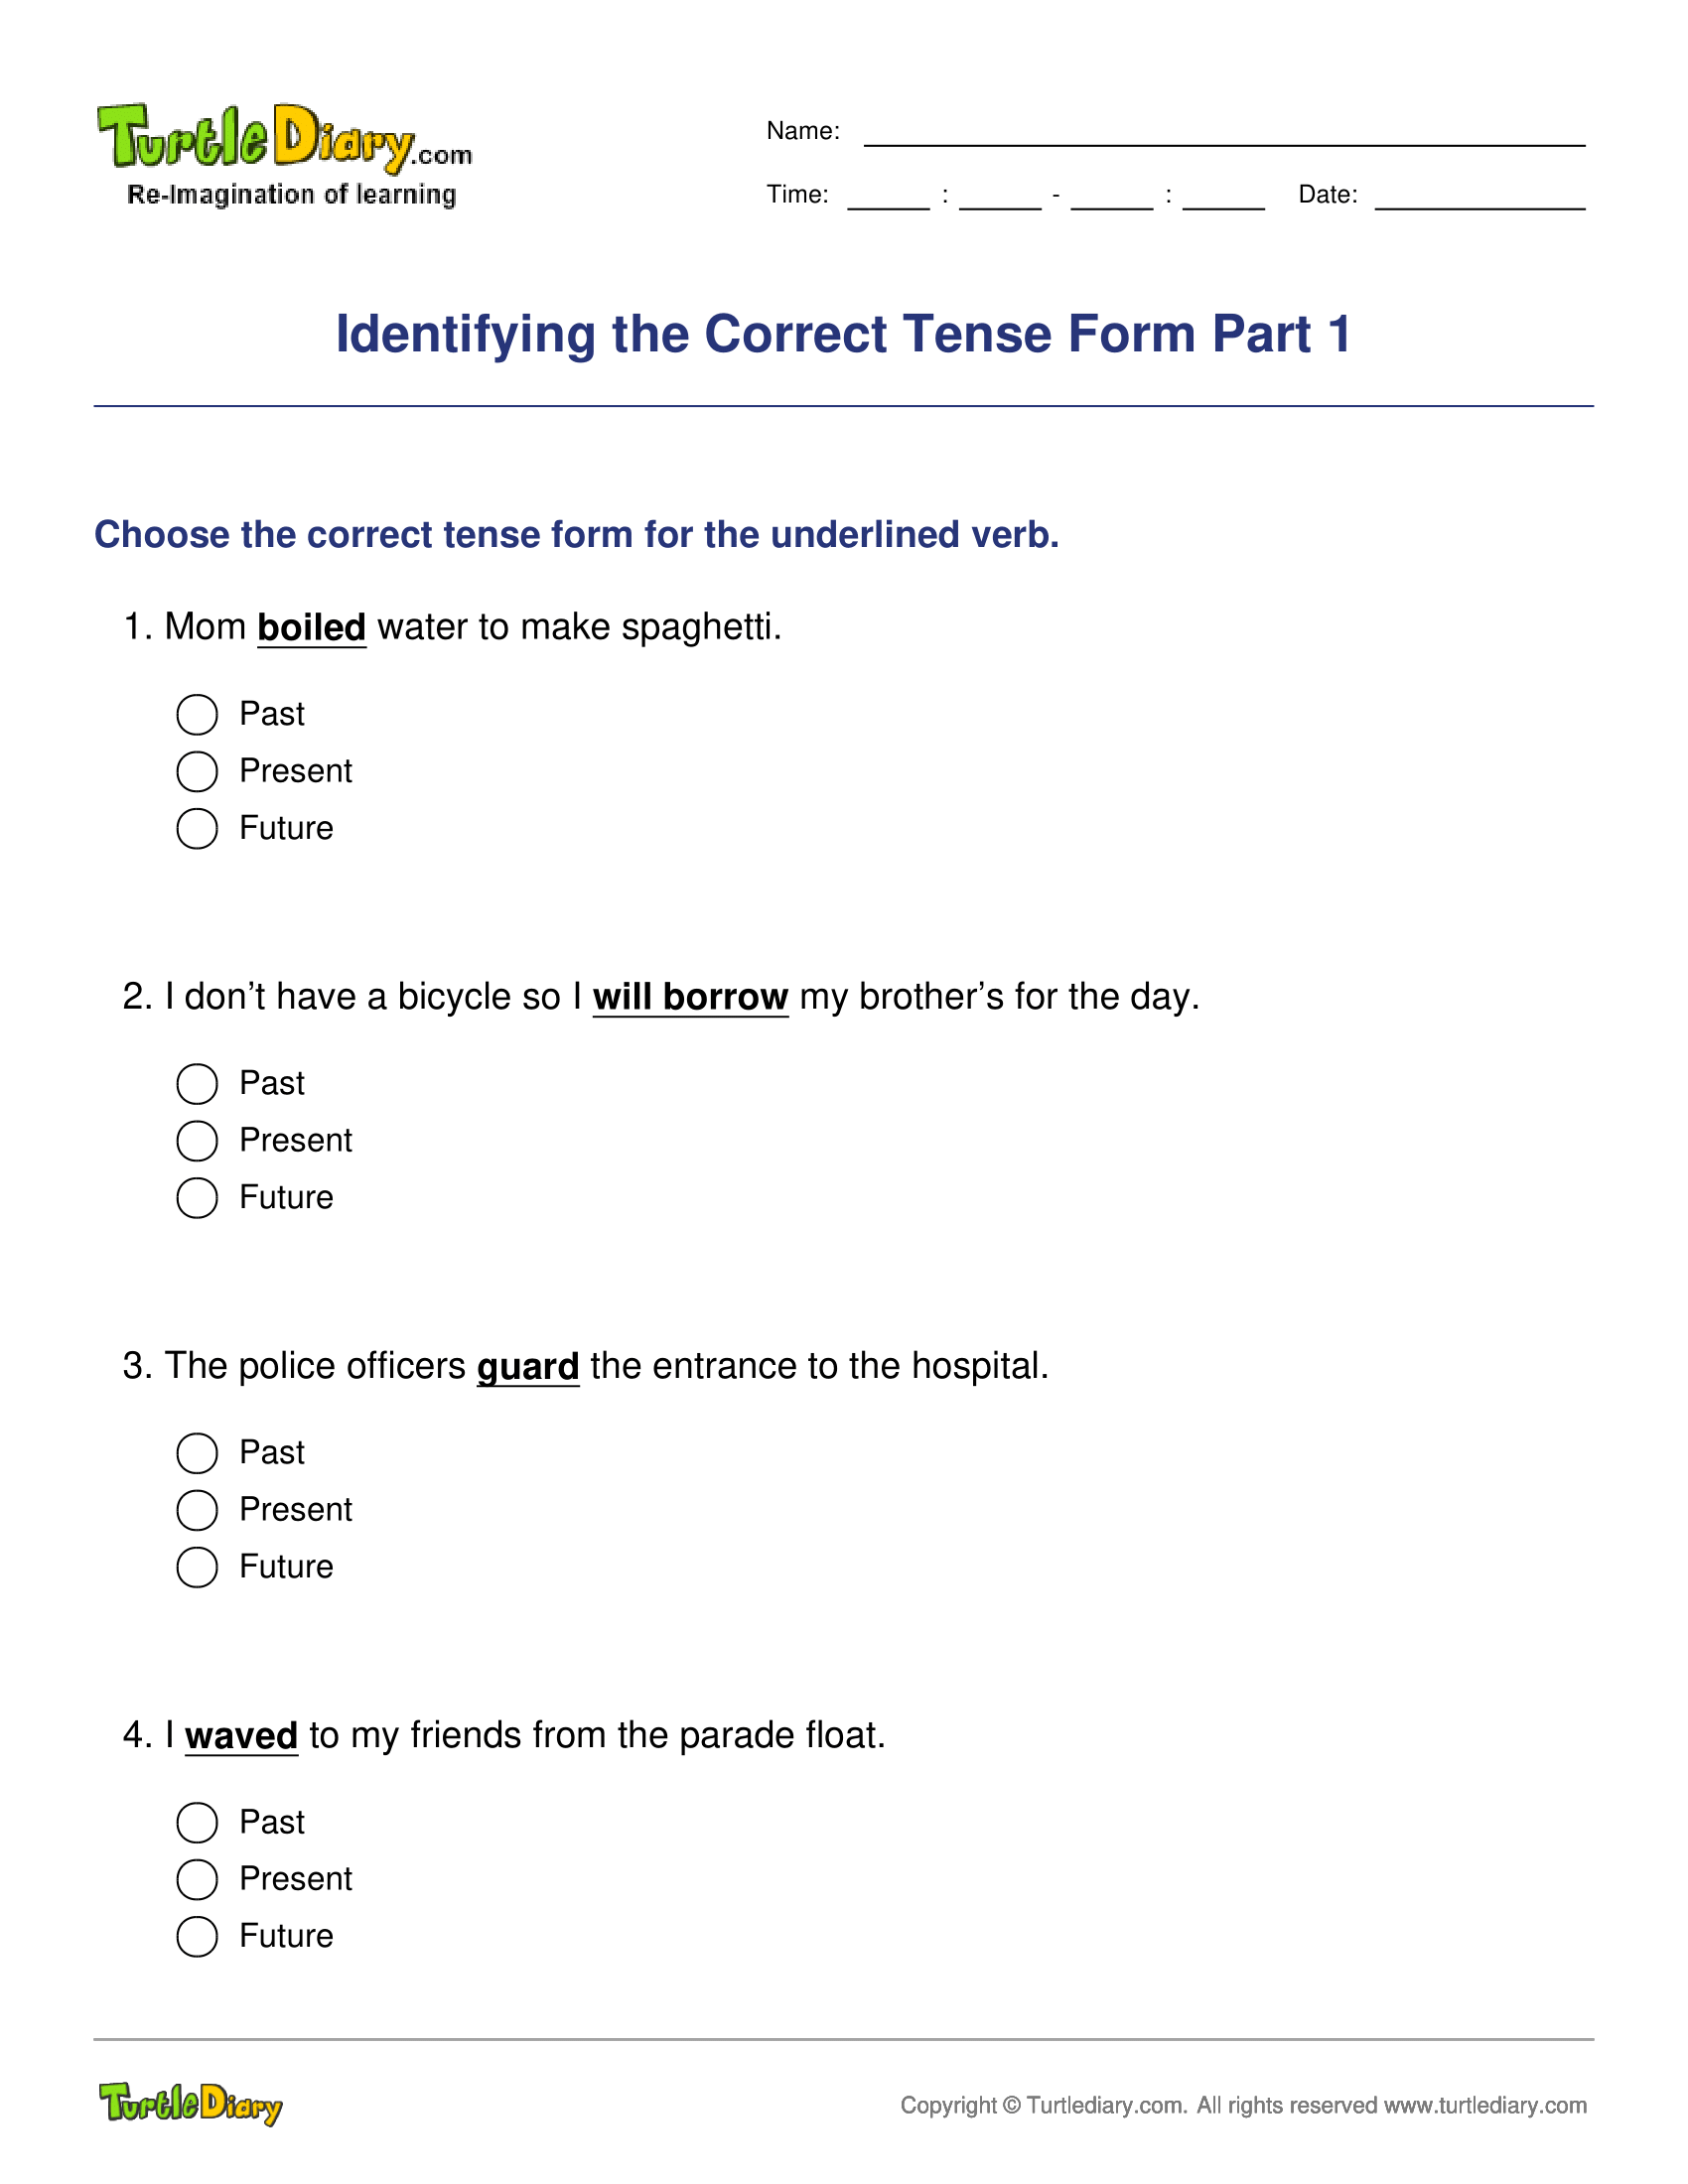 Identifying the Correct Tense Form Part 1